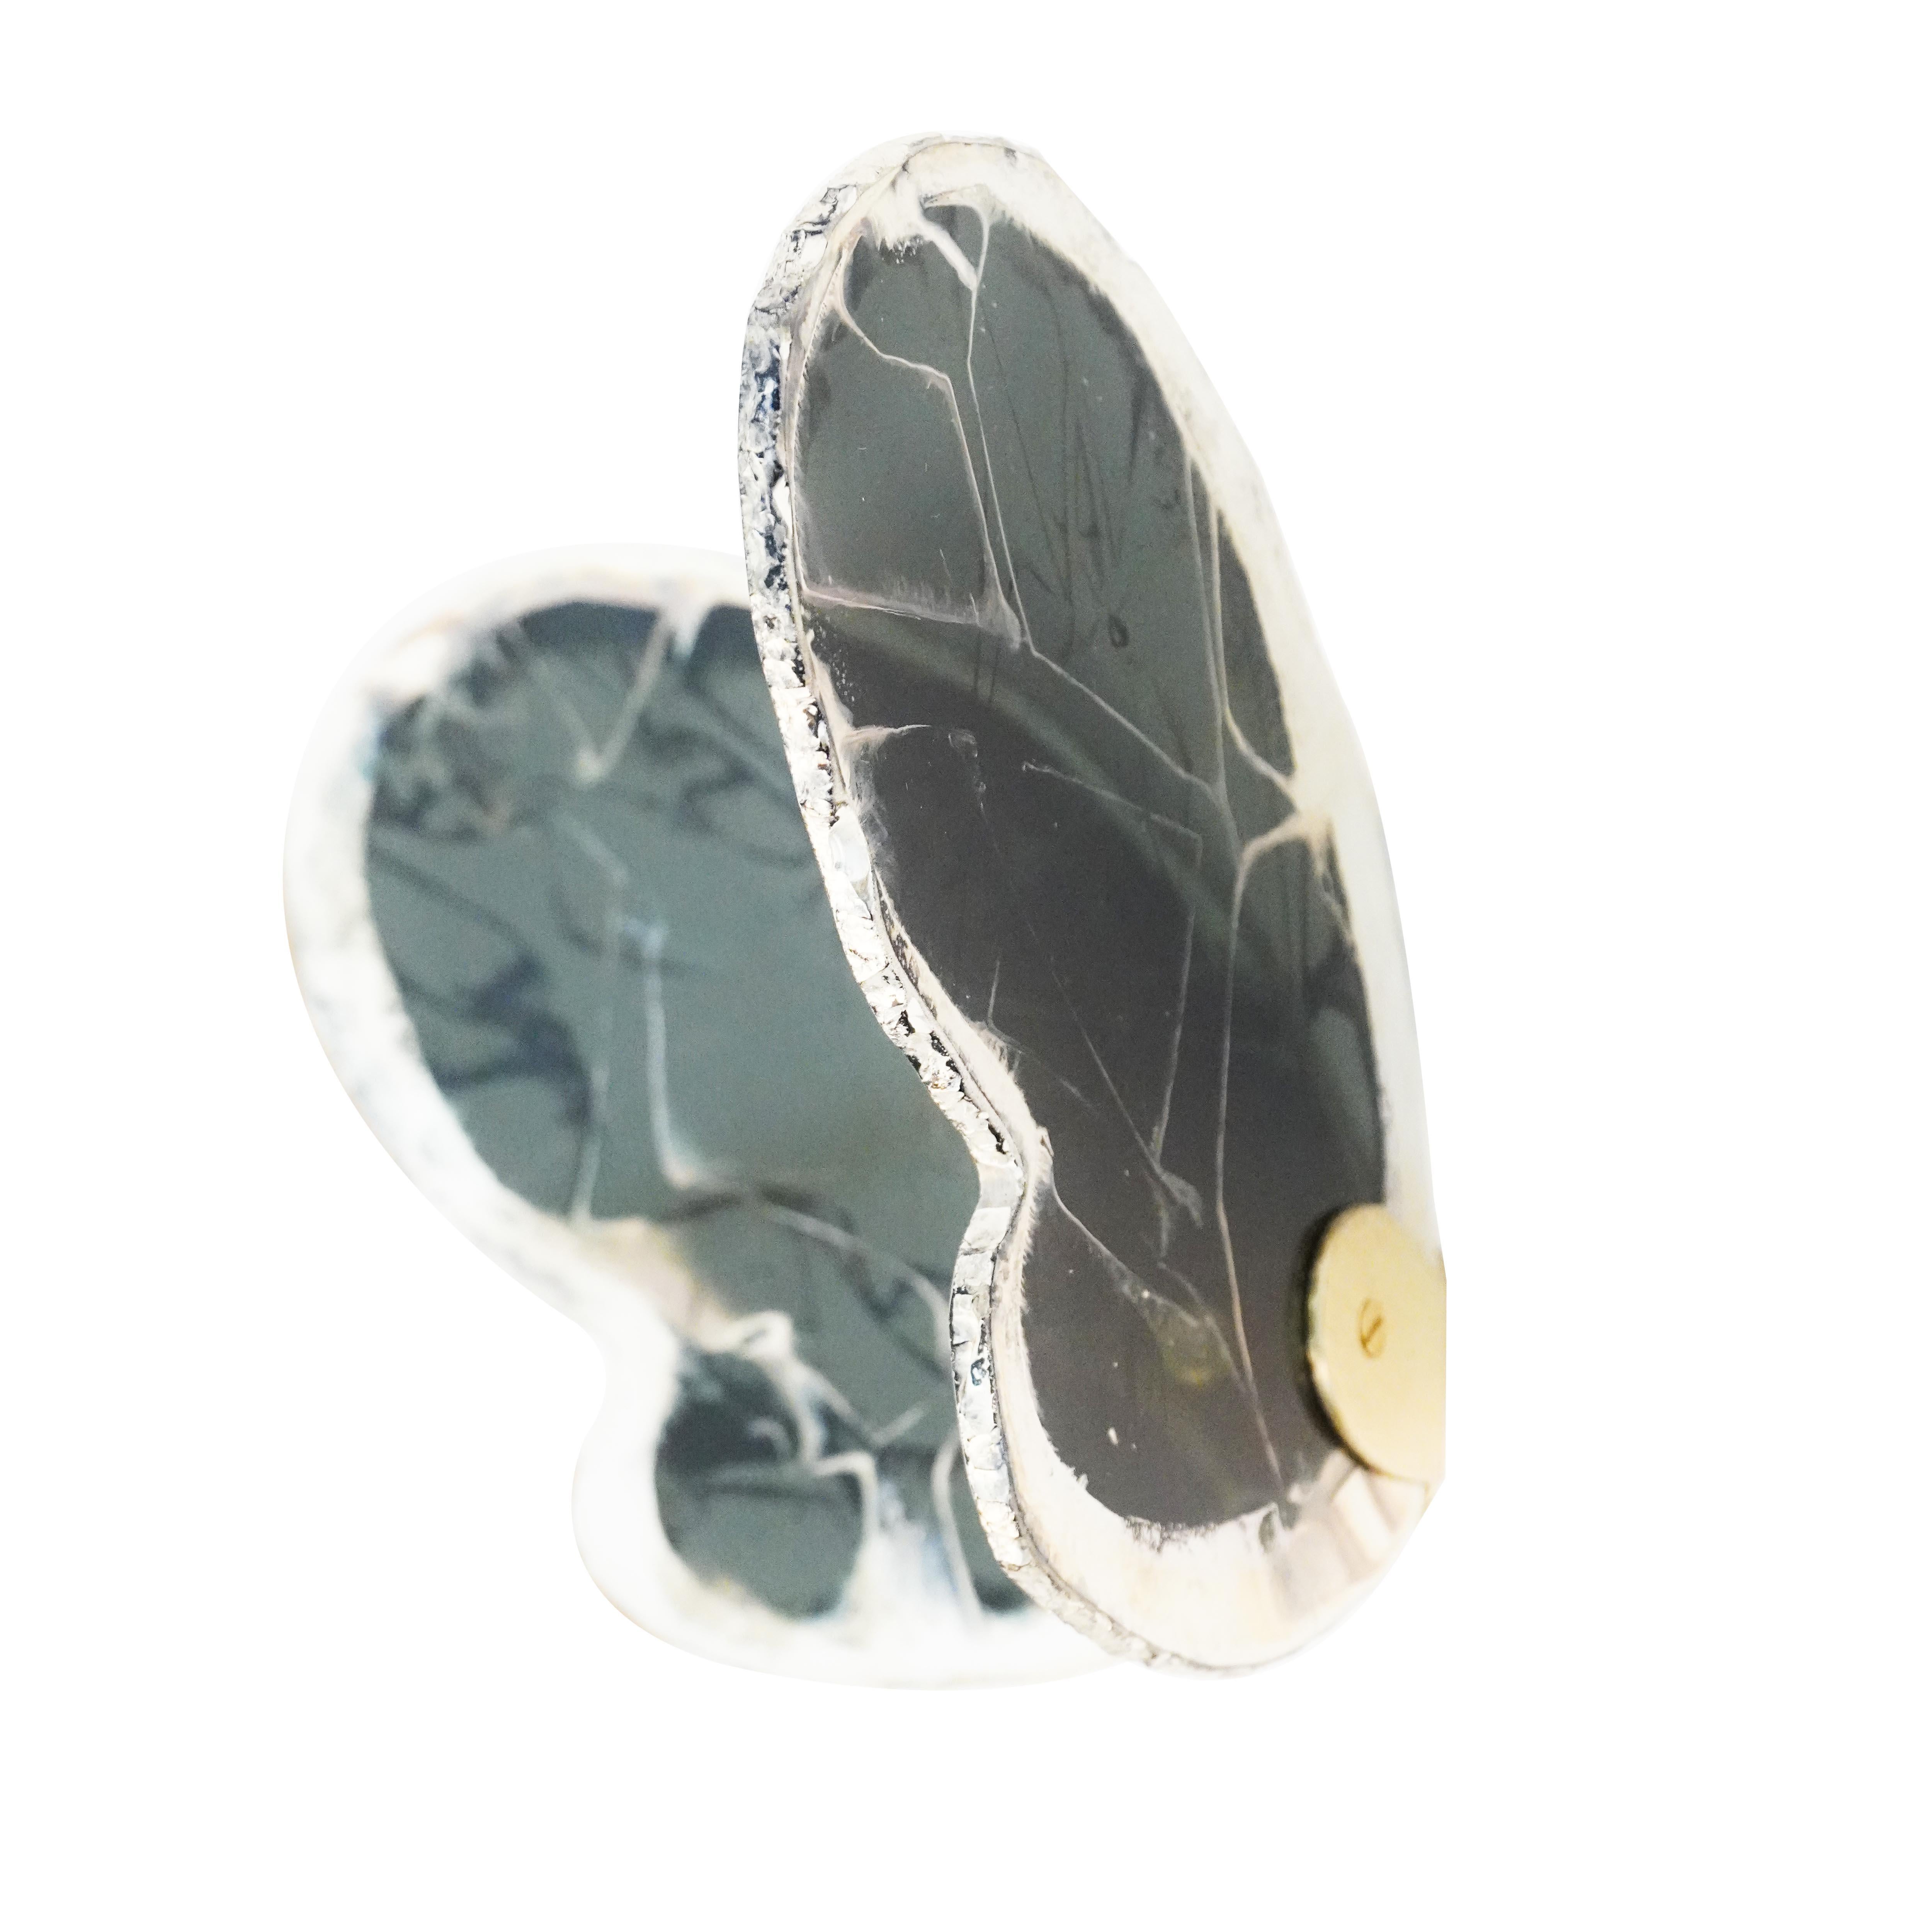 BUTTERFLY colored glass wings are dancing in the sky

Since 20 years, we have perpetuated our unique manufacturing method.
Inspired by unlimited glass reflections, Sabrina Landini has created an elegant home collection.

Wall Sculpture Butterfly, an